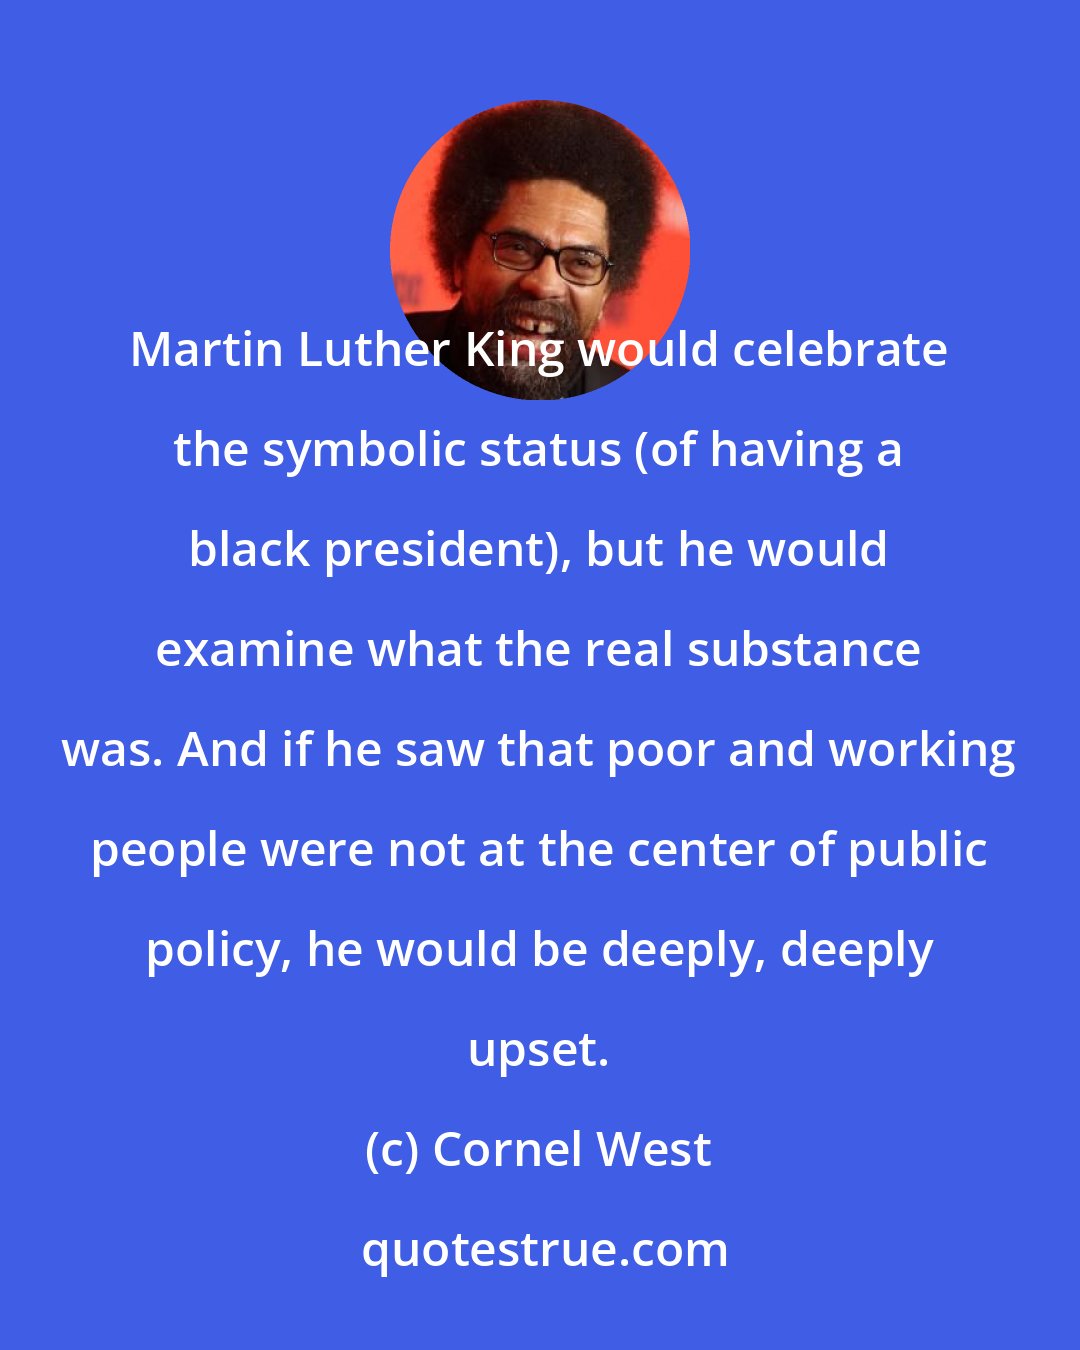 Cornel West: Martin Luther King would celebrate the symbolic status (of having a black president), but he would examine what the real substance was. And if he saw that poor and working people were not at the center of public policy, he would be deeply, deeply upset.